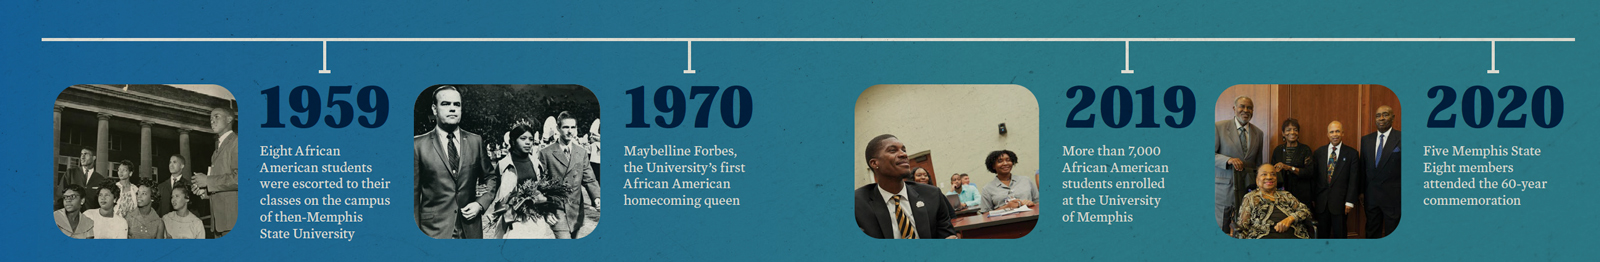 1959-Eight African American students were escorted to their classes on the campus of then-Memphis State University.1970-Maybelline Forbes, the University's first African American homecoming queen.2019-More than 7,000 African American students enrolled at the University of Memphis.2020-Five Memphis State Eight members attended the 60-year commemoration